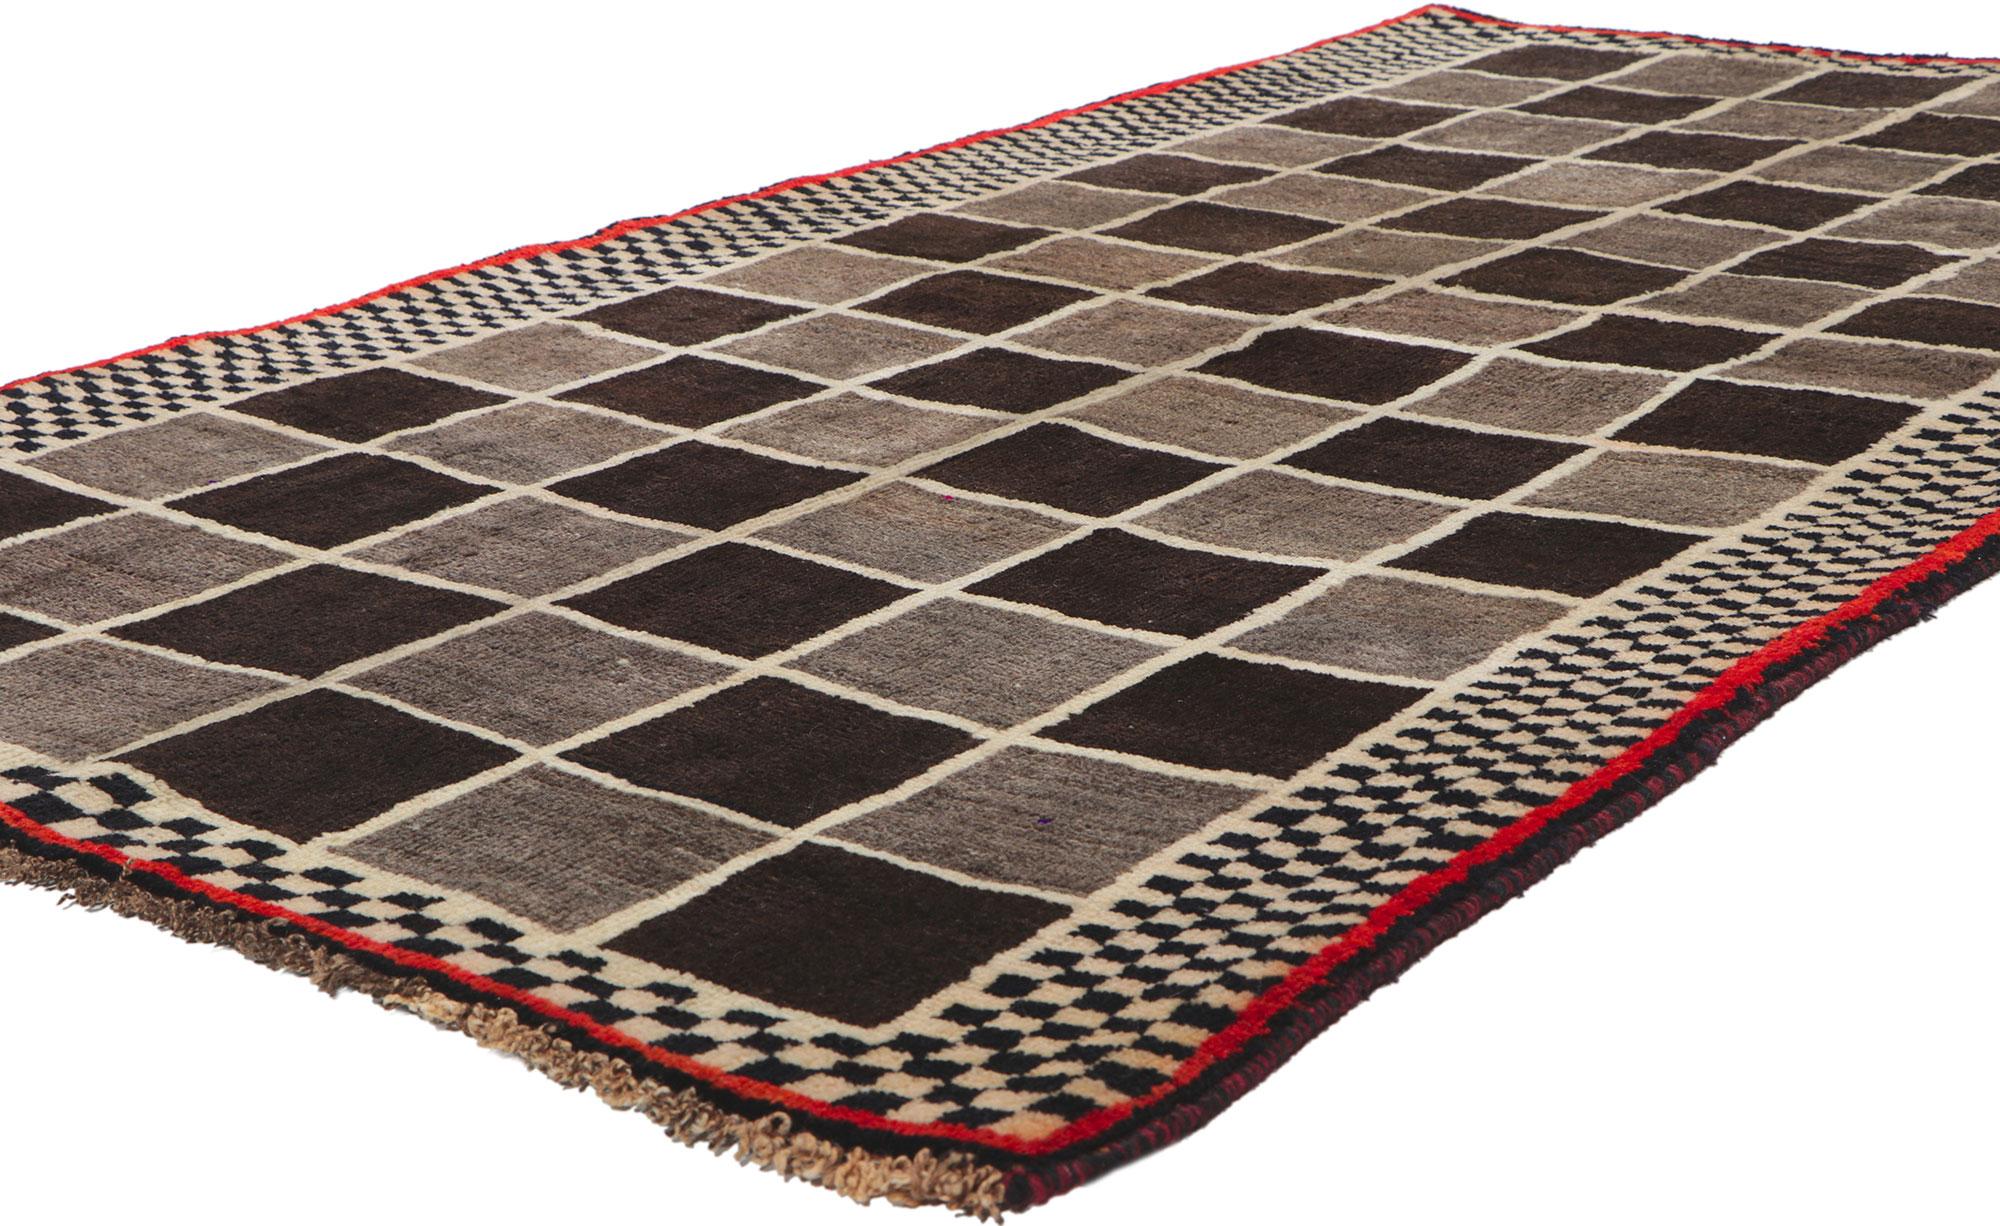 61071 Vintage Persian Gabbeh rug, 03'10 x 07'03. With its checkerboard design, incredible detail and texture, this hand knotted wool vintage Persian Gabbeh rug is a captivating vision of woven beauty. The eye-catching checkered pattern and warm